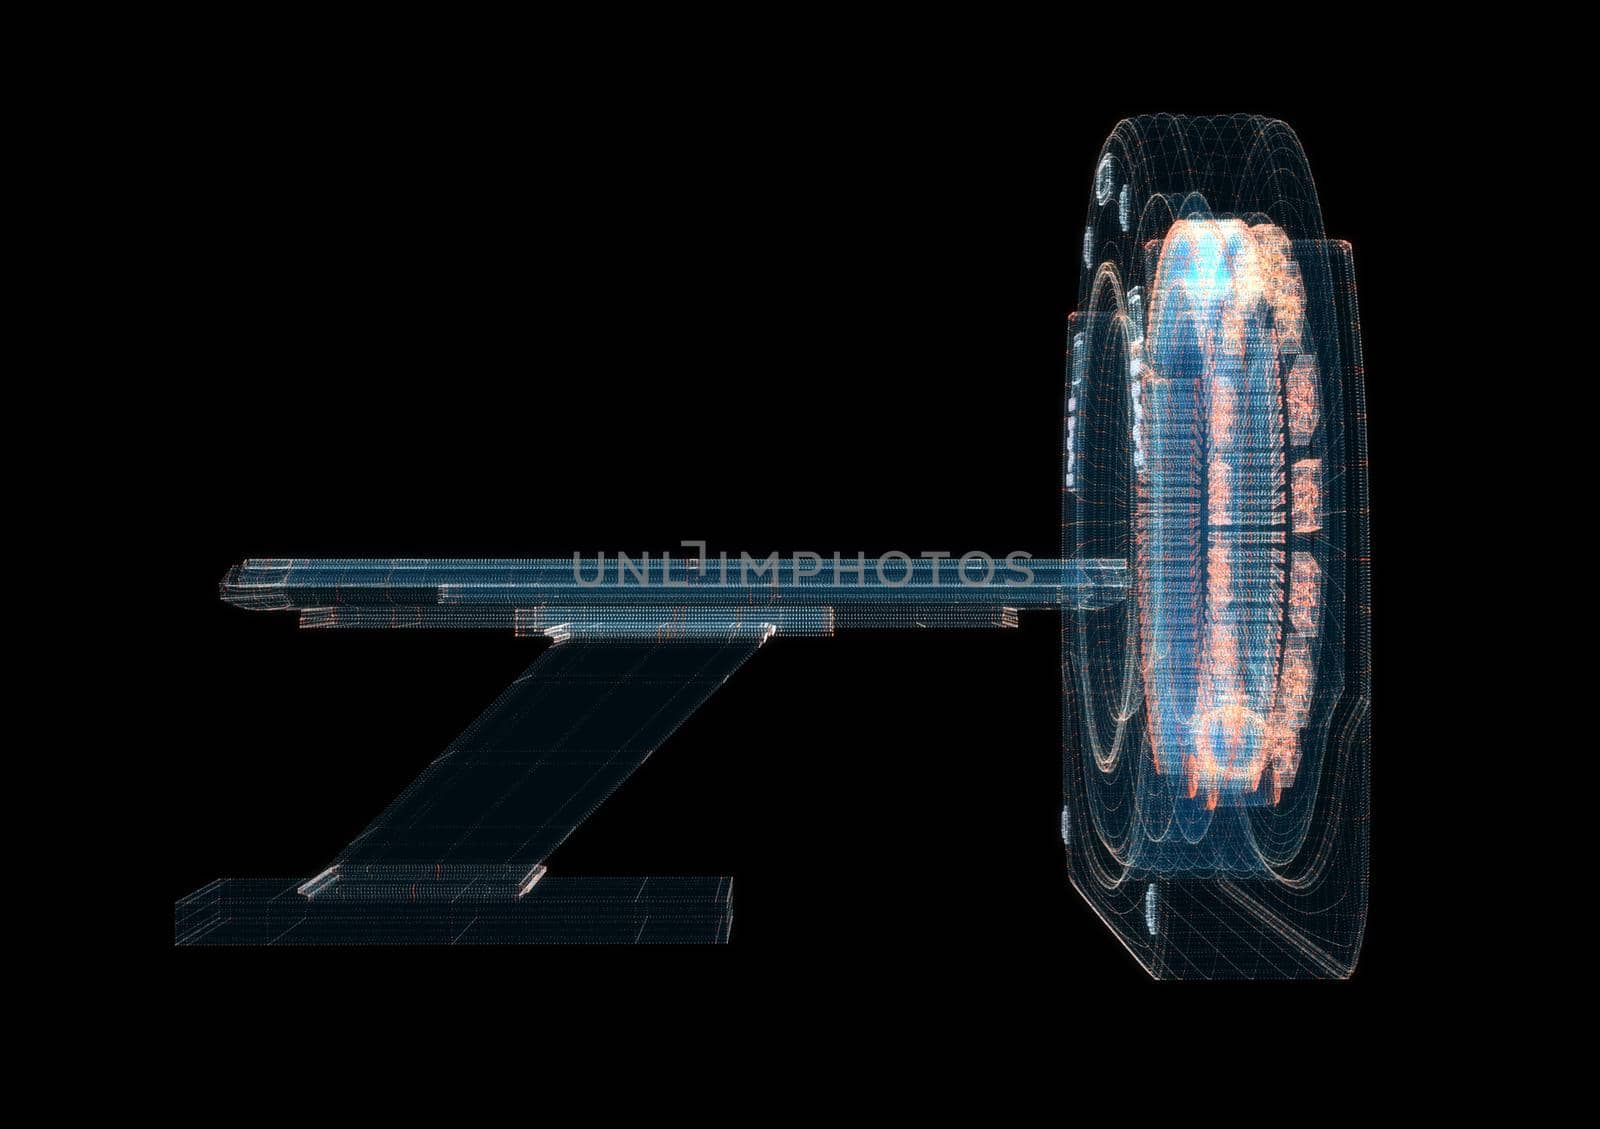 Digital MRI scan Hologram. Medicine and Technology Concept by cherezoff